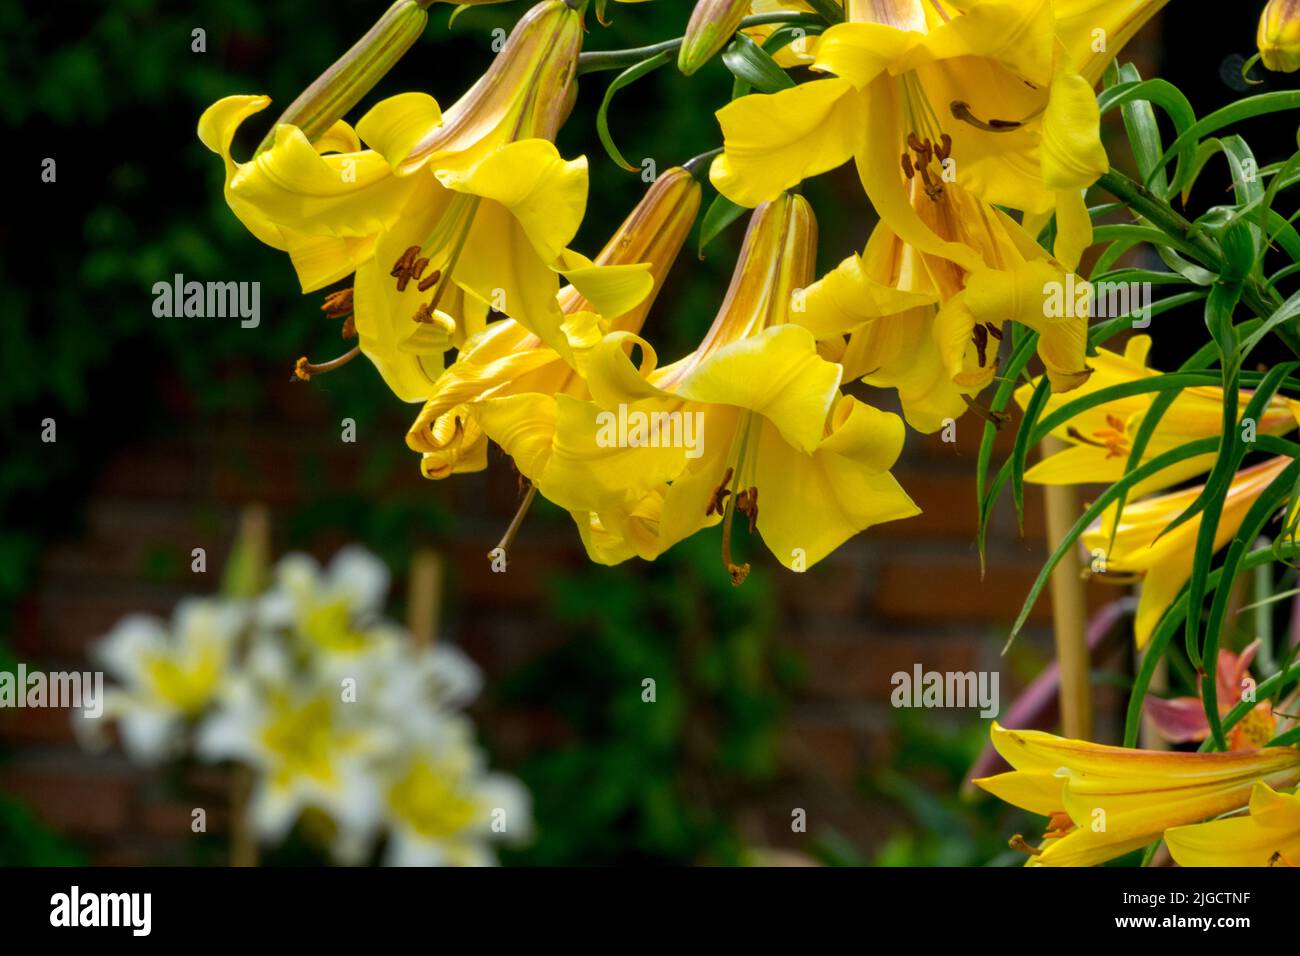 Beautiful Lilium Tubular Flowers Lilium 'Golden Splendor' Trumpet Lily Yellow Lilies in Garden Flowers Blooming July Flowering Attractive Lily Hybrid Stock Photo